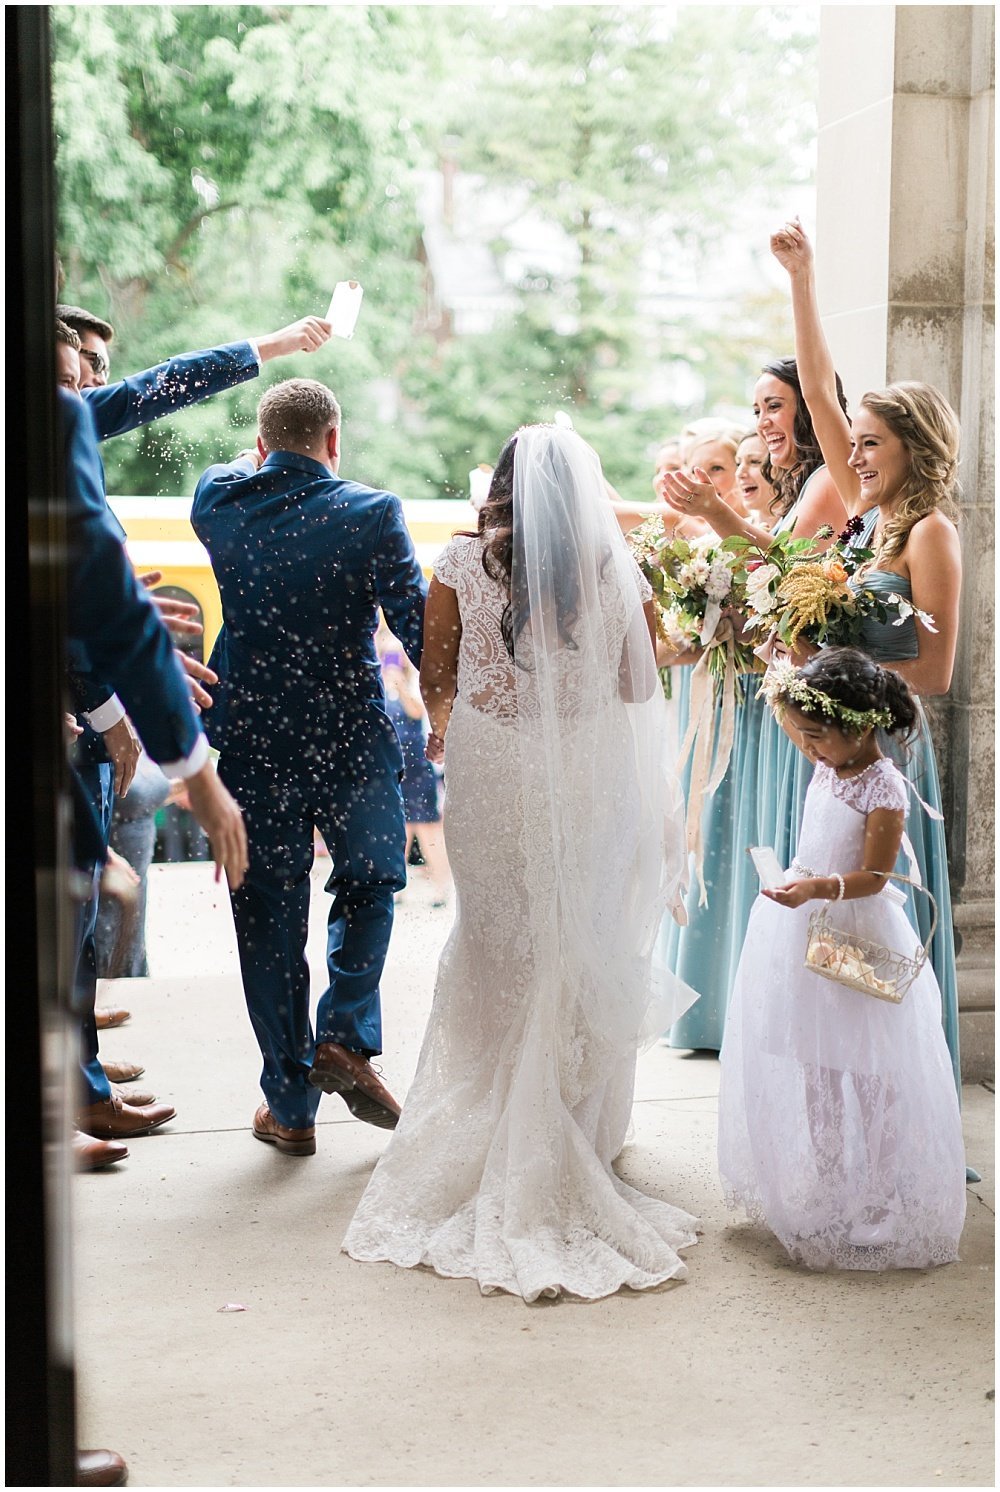 Summer-Mexican-Inspired-Gold-And-Floral-Crowne-Plaza-Indianapolis-Downtown-Union-Station-Wedding-Cory-Jackie-Wedding-Photographers-Jessica-Dum-Wedding-Coordination_photo___0016